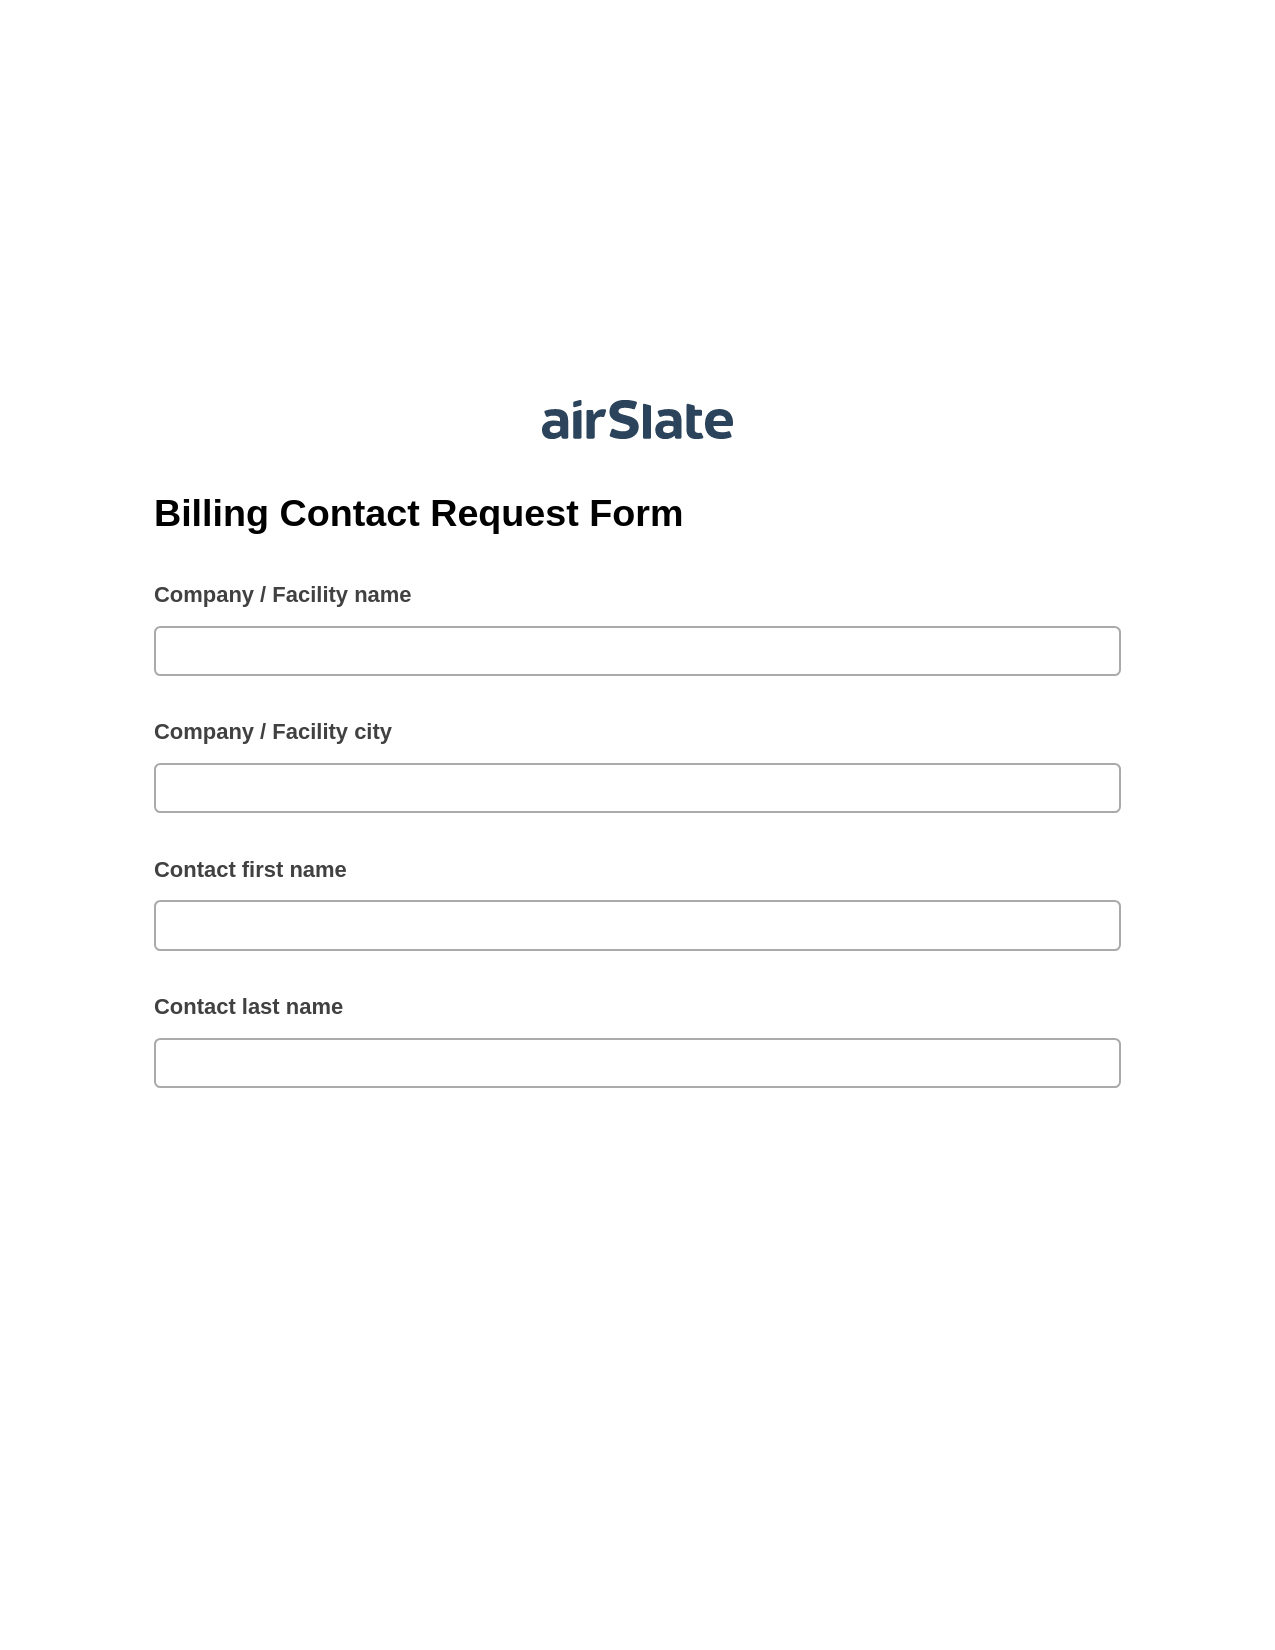 Billing Contact Request Form Pre-fill Slate from MS Dynamics 365 Records Bot, Create Salesforce Record Bot, Google Drive Bot